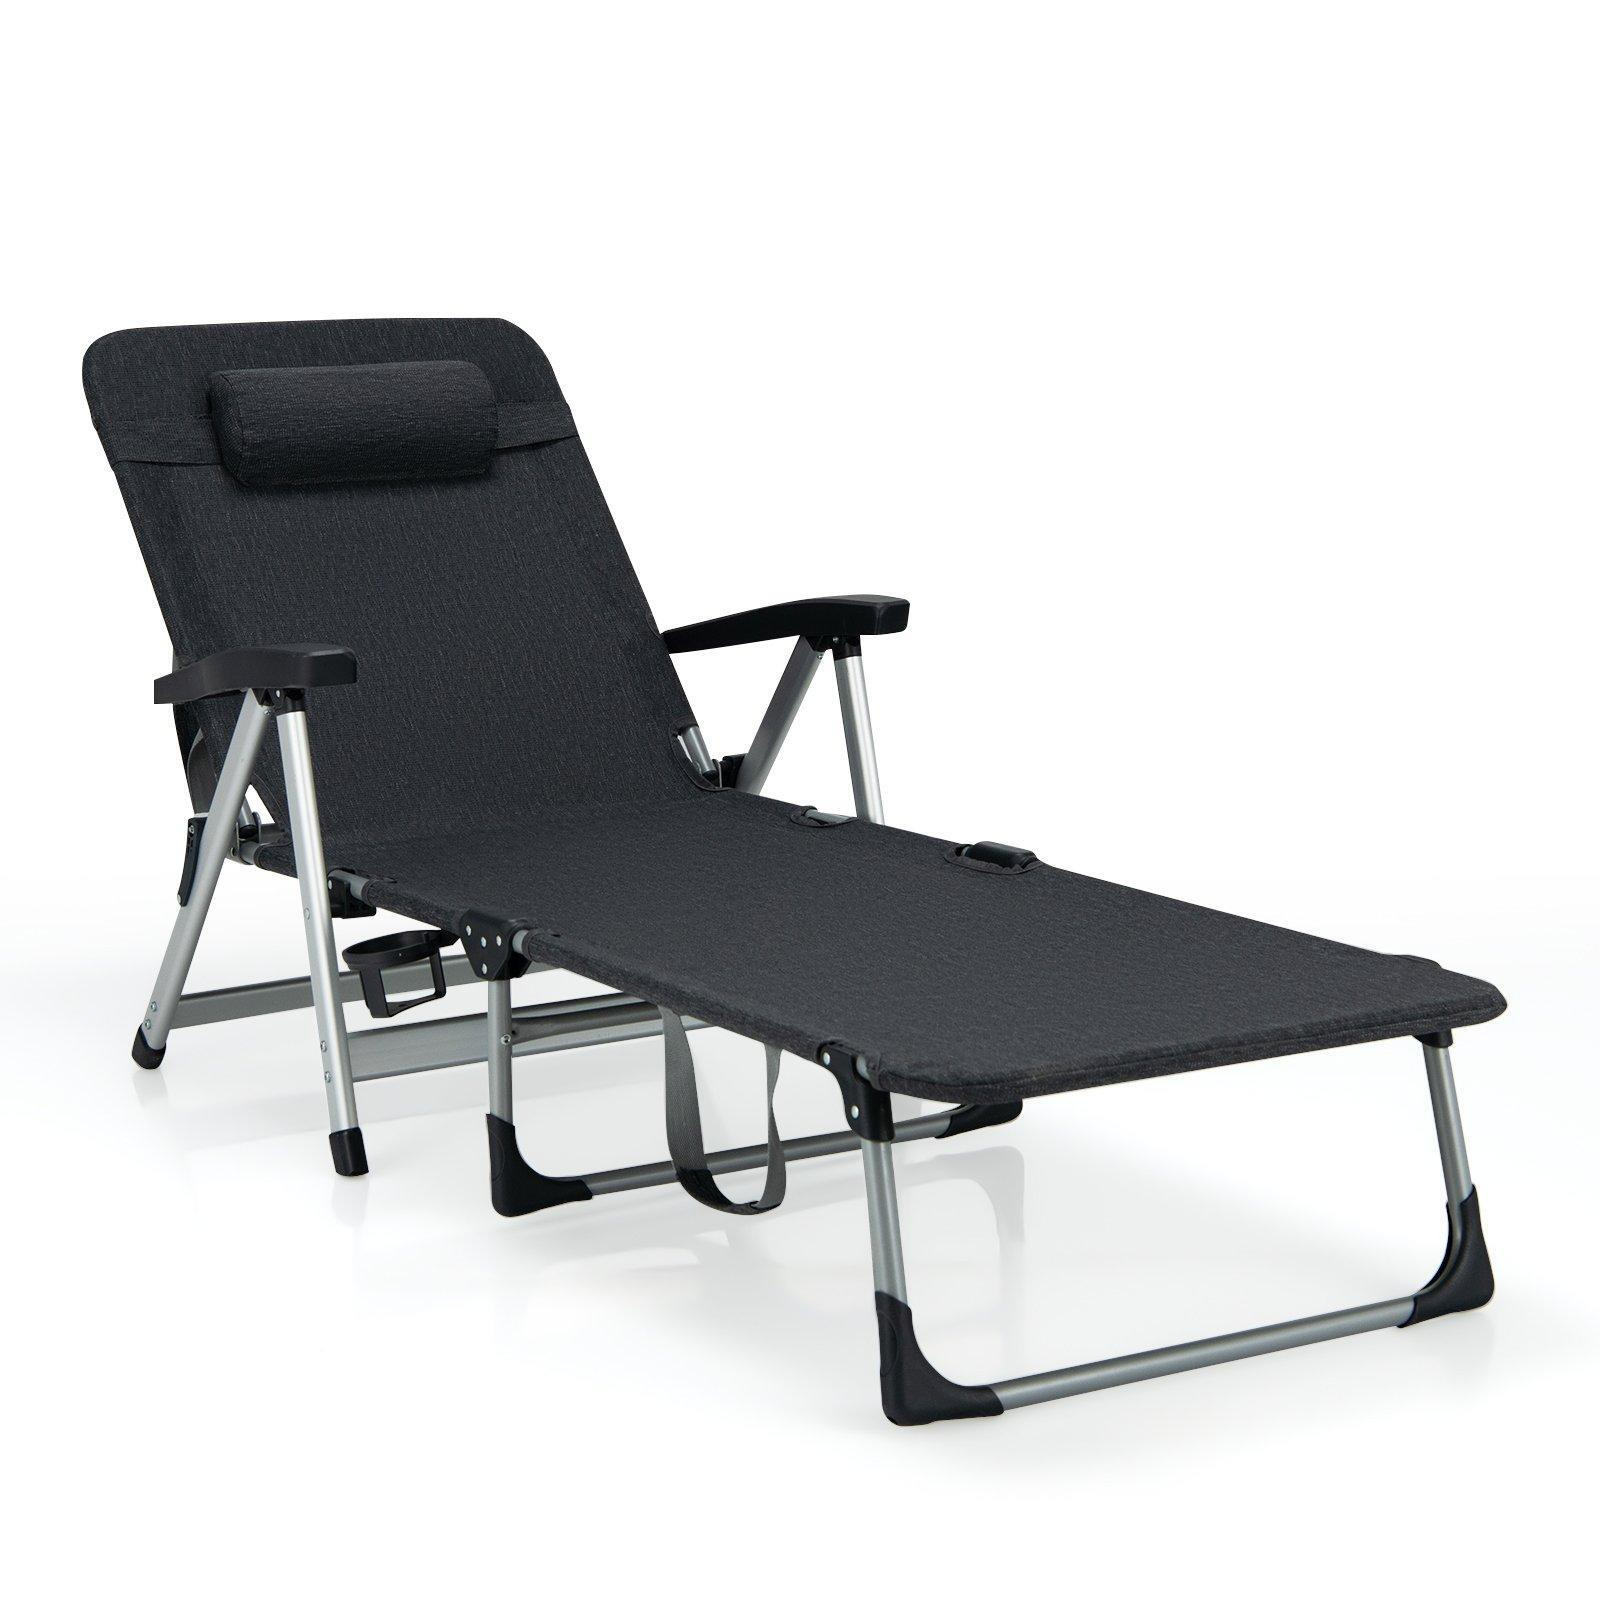 Folding Outdoor Chaise Lounger Patio Lounge Chair - image 1